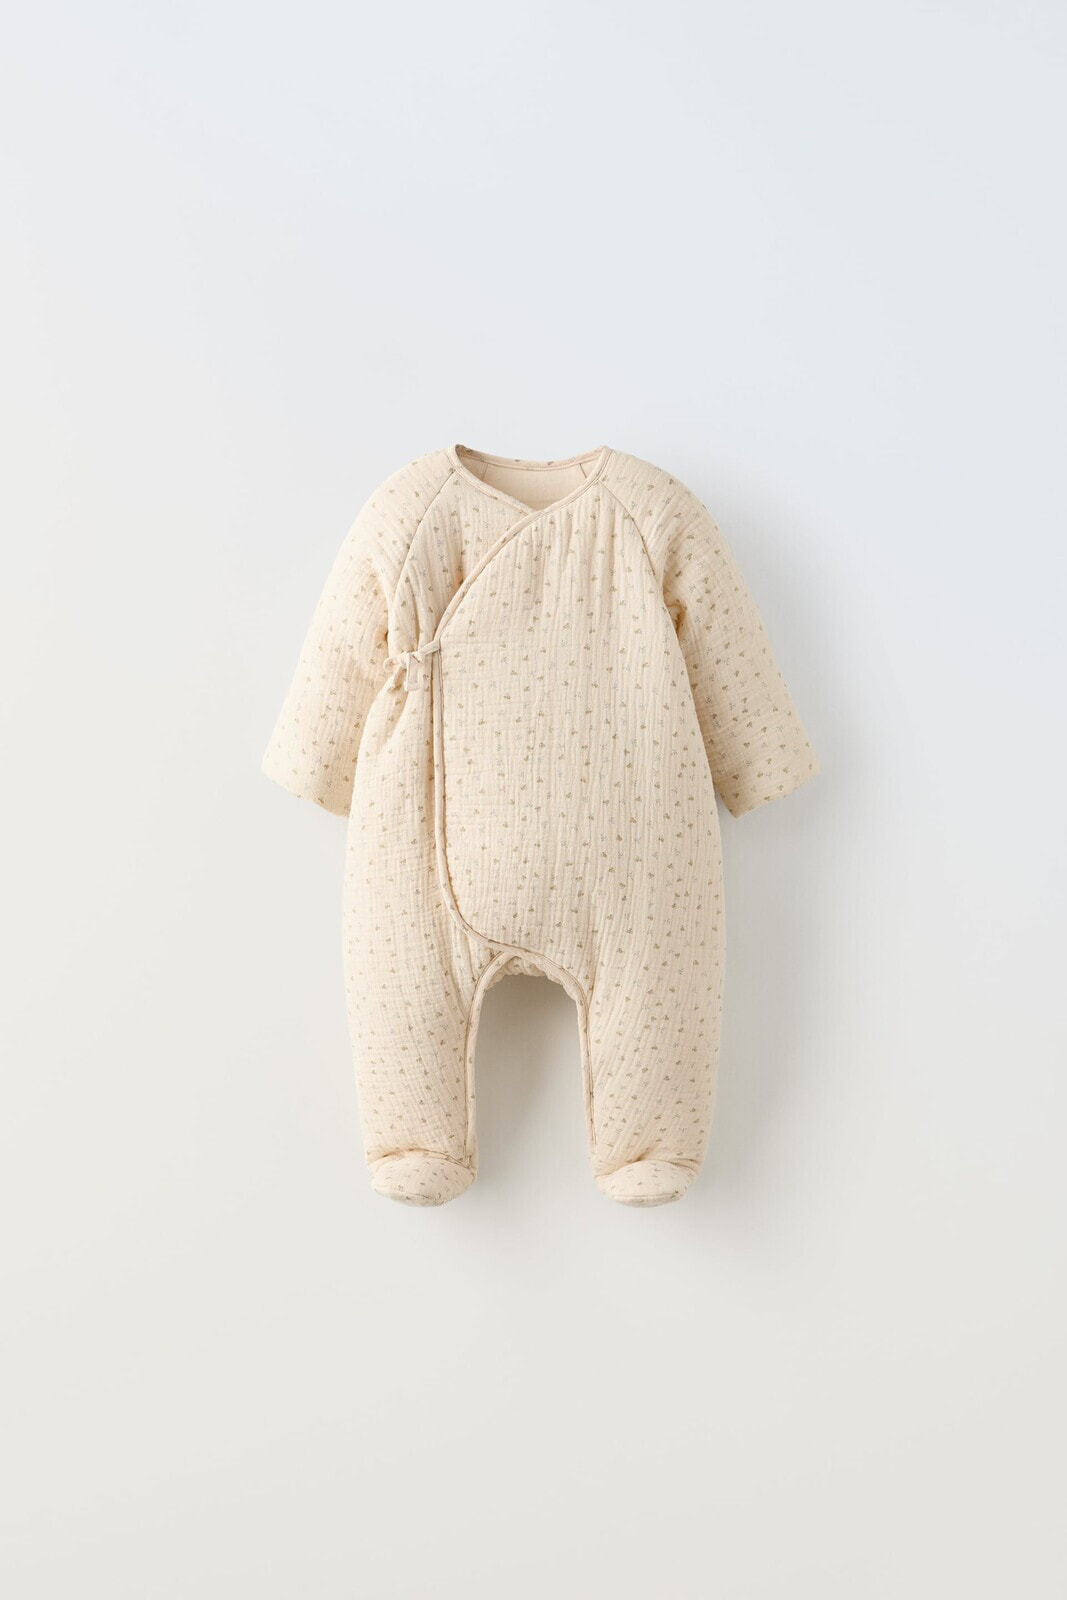 Textured quilted sleepsuit with branch design